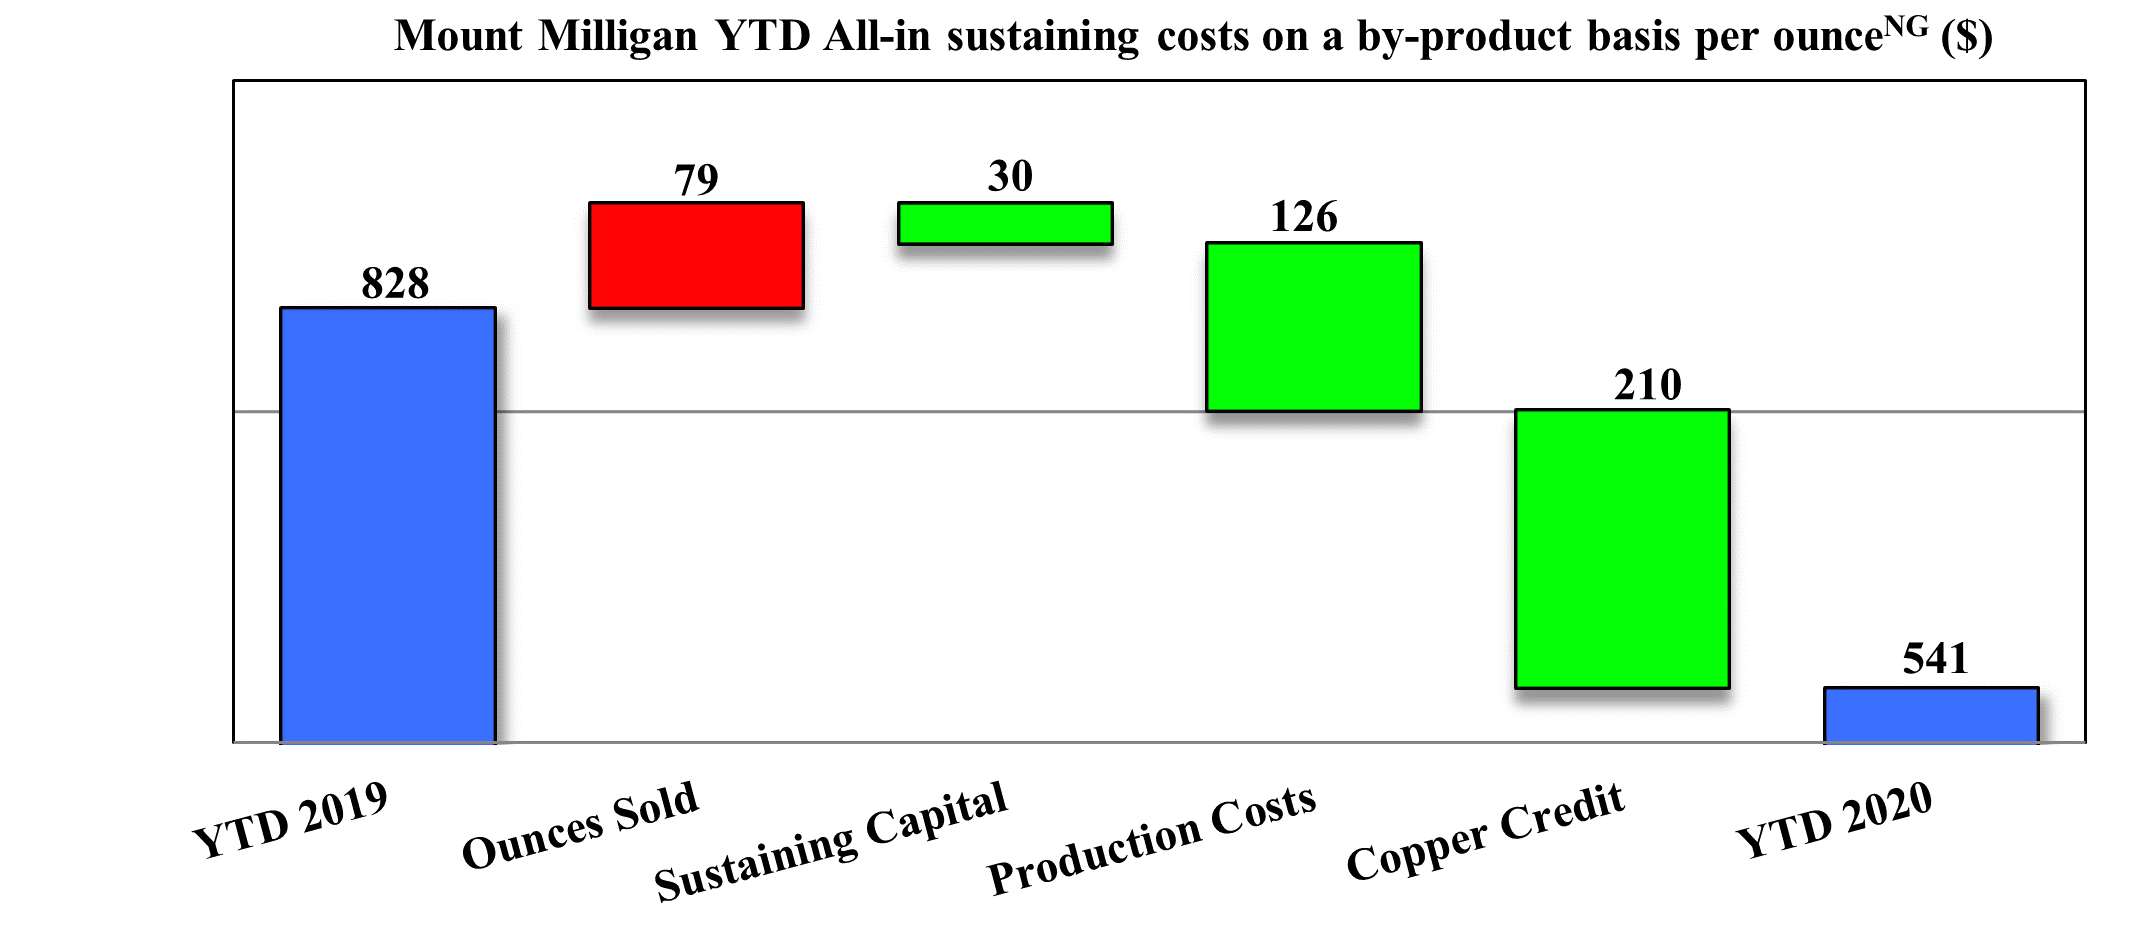 Mount Milligan YTD All-in sustaining costs on a by-product basis per ounce (Non-GAAP) ($)